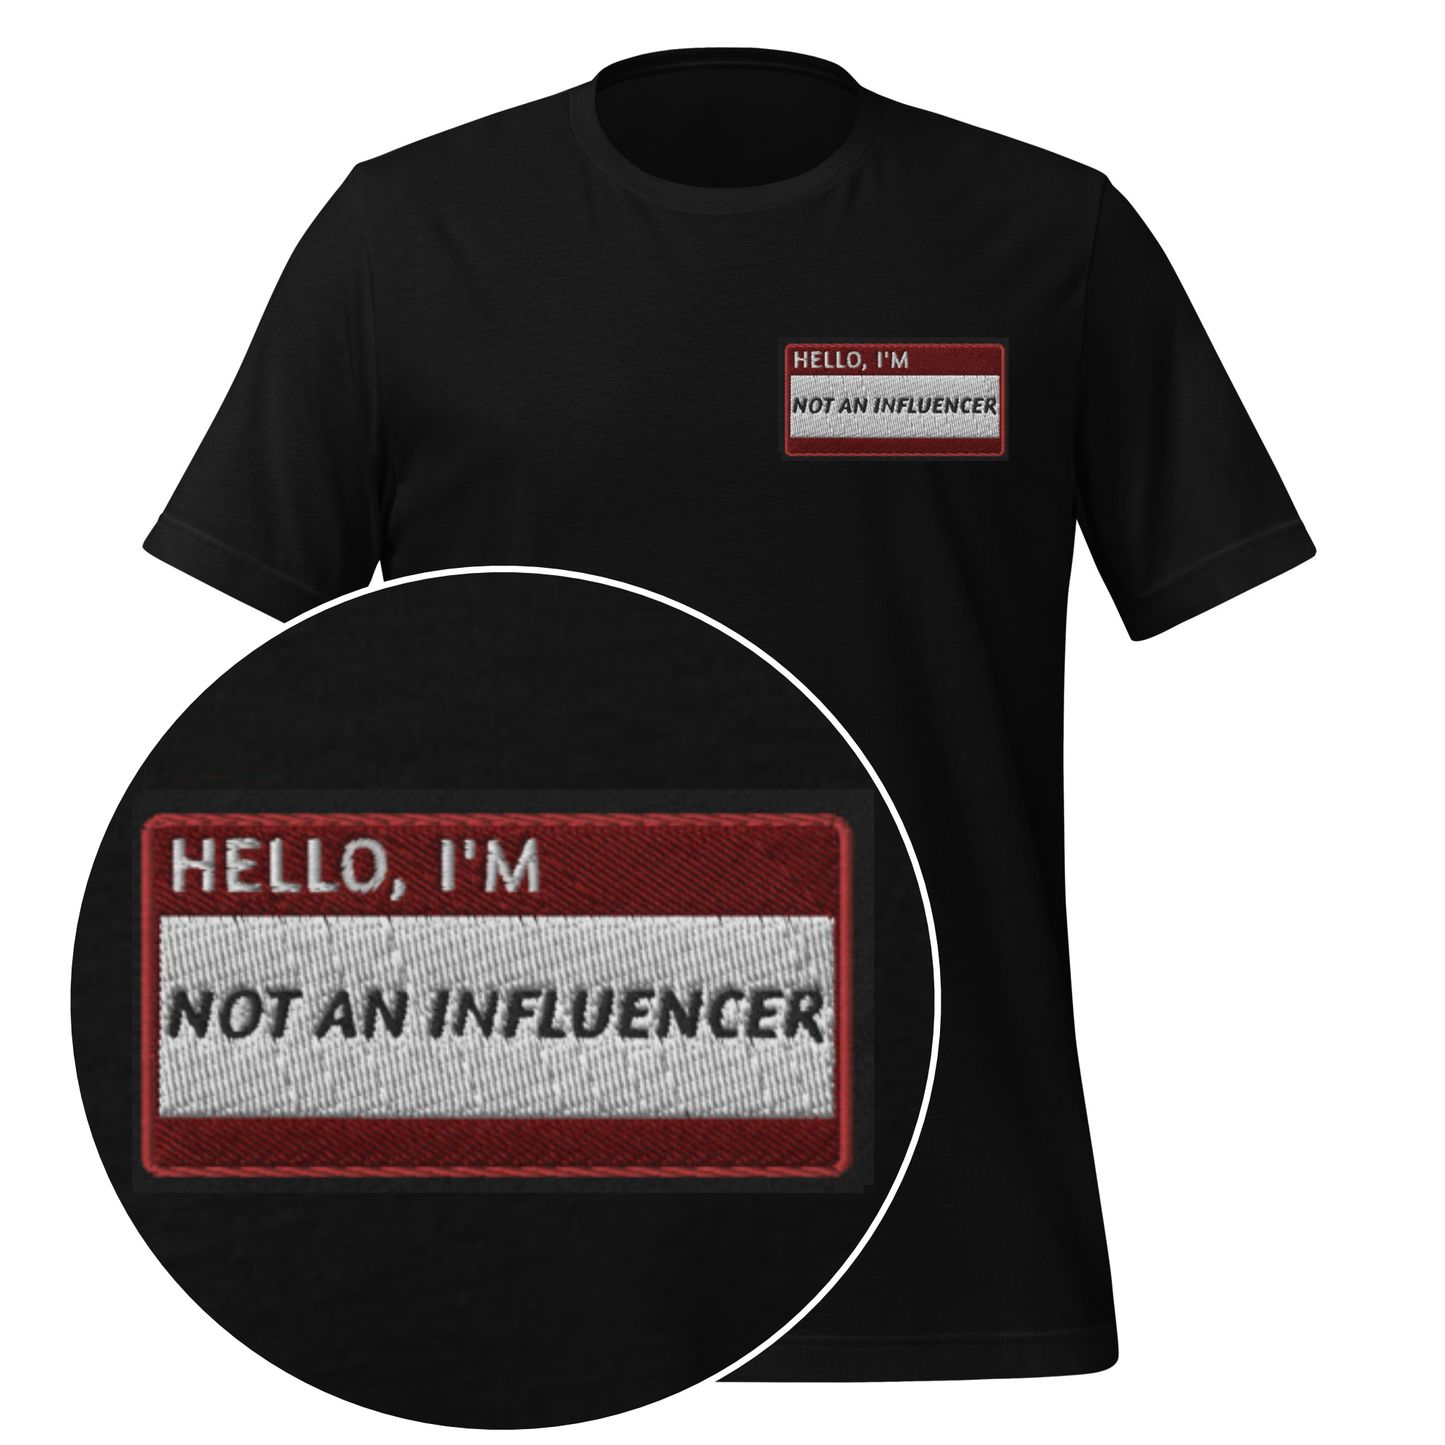 HELLO I'M NOT AN INFLUENCER - Name Tag T-Shirt